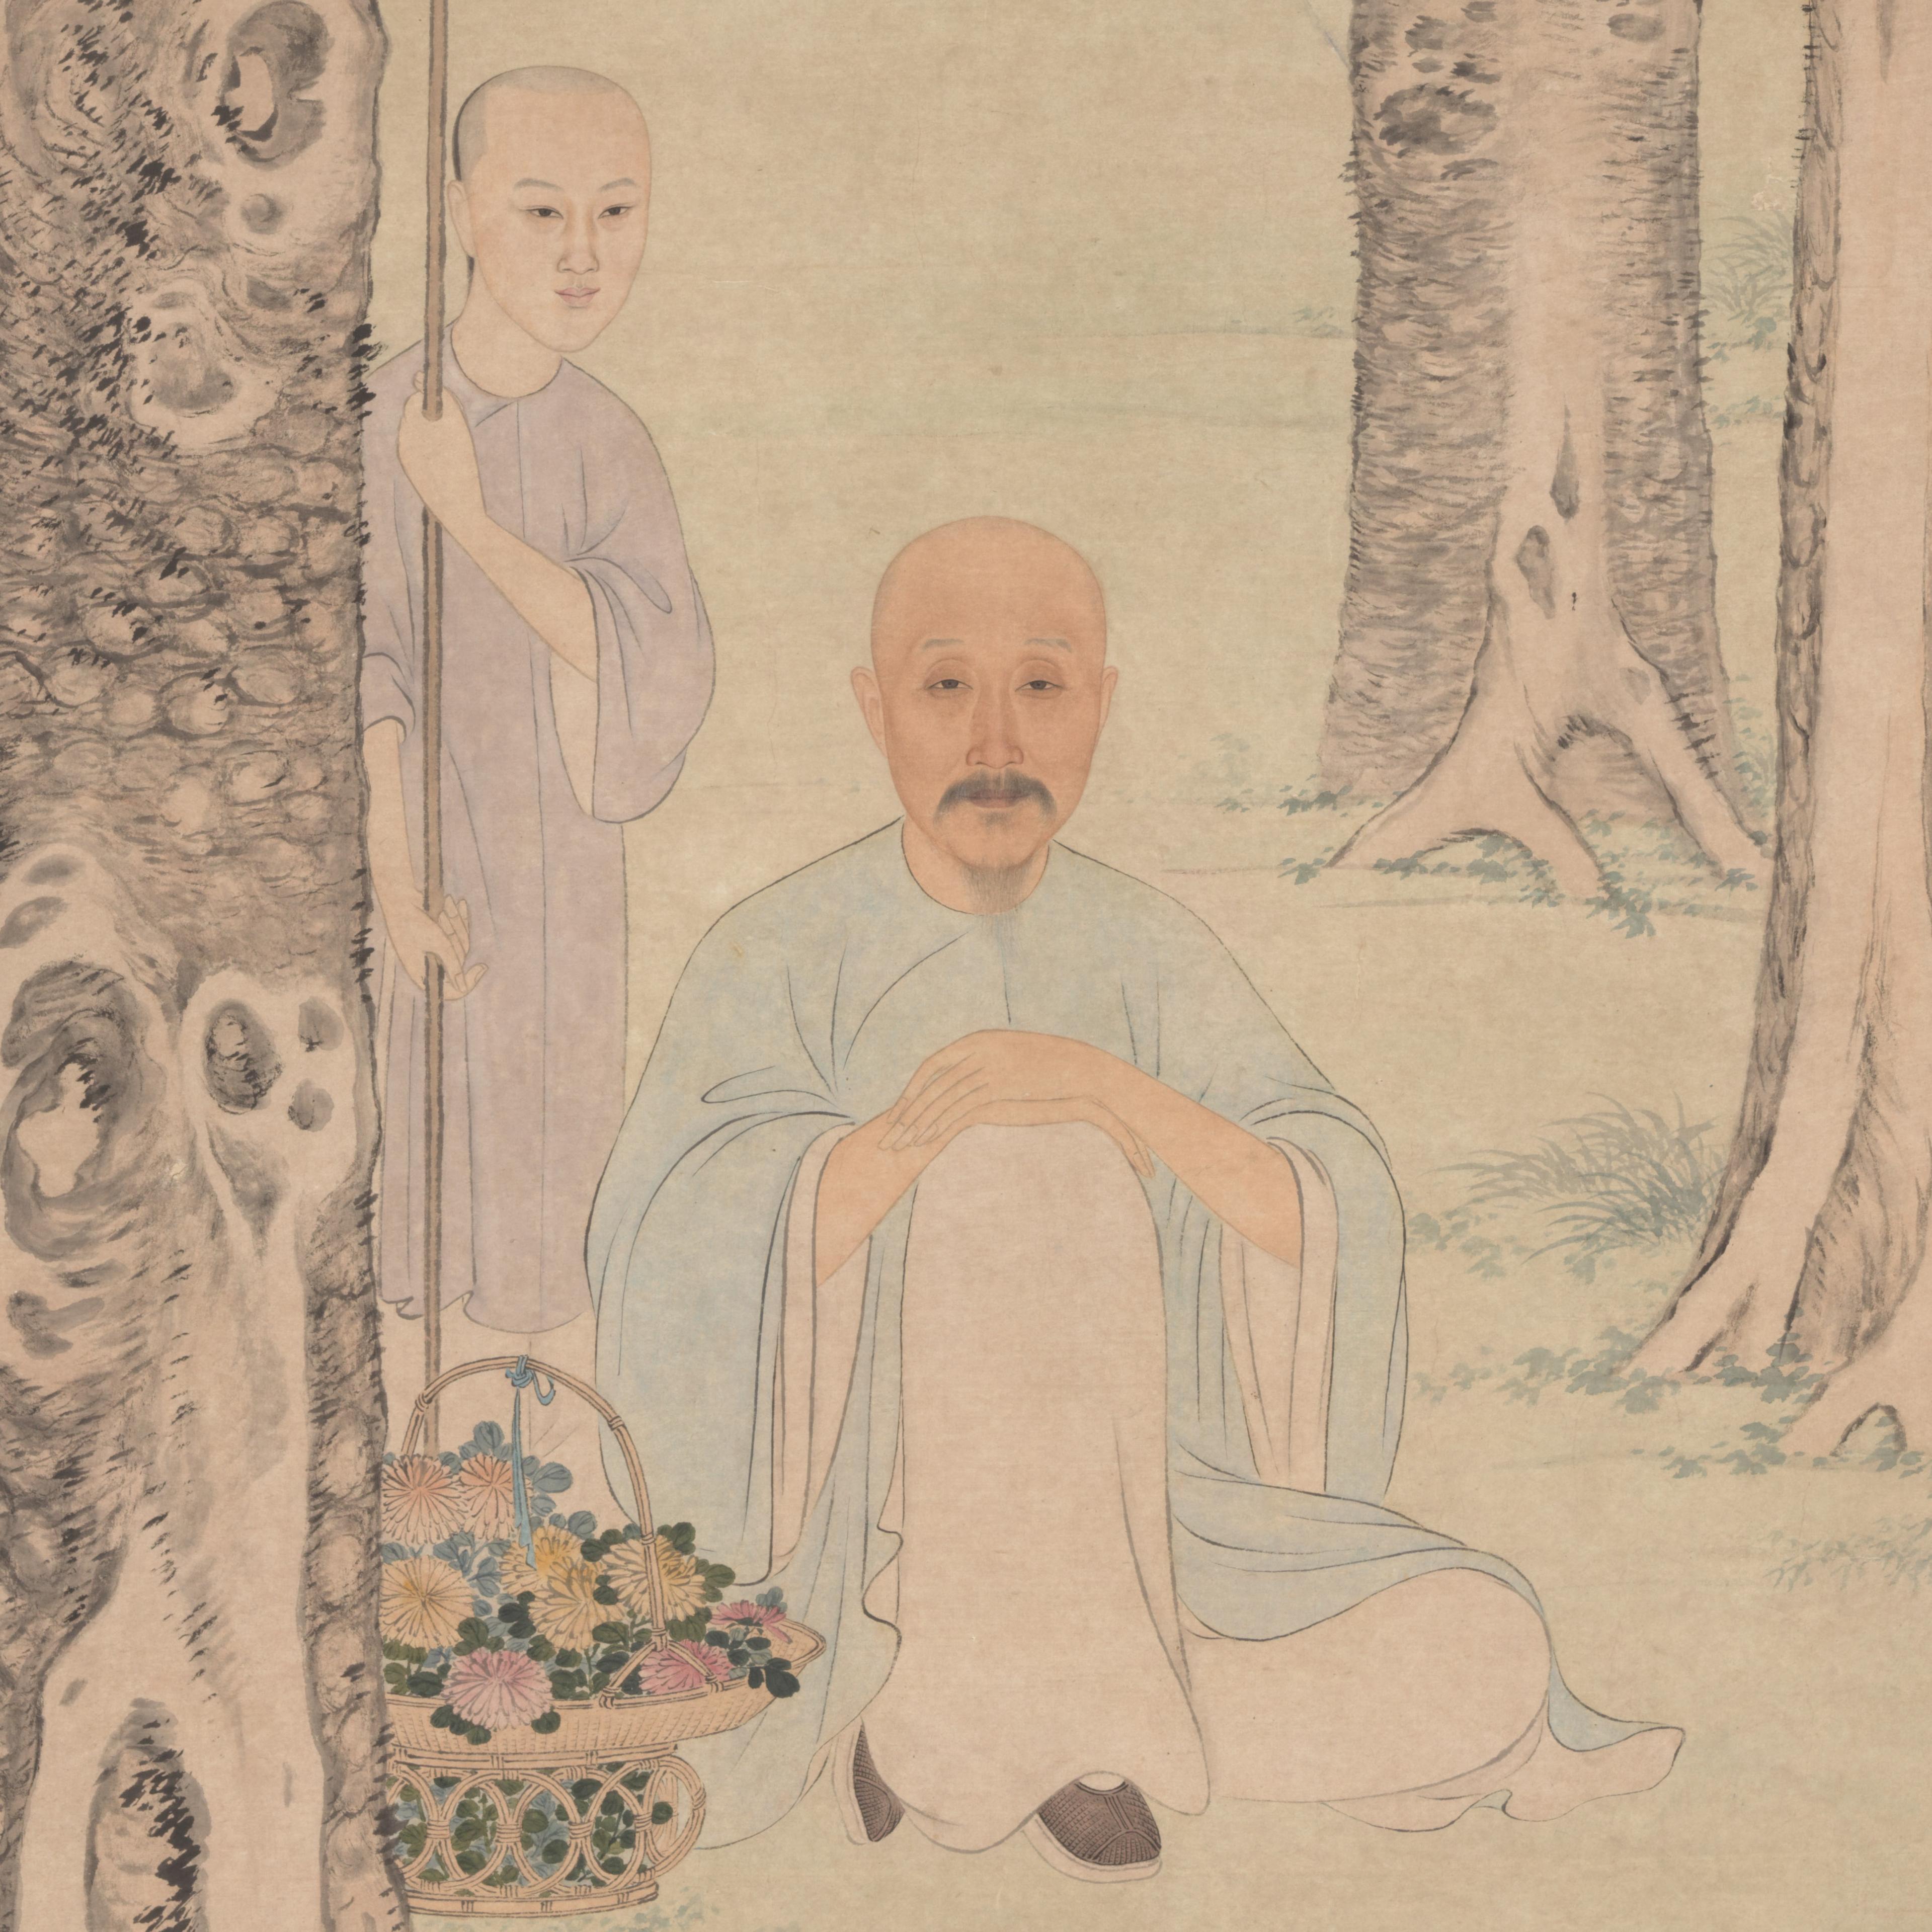 Drawing of a man, sitting in the middle of the forest with a woman watching from behind.